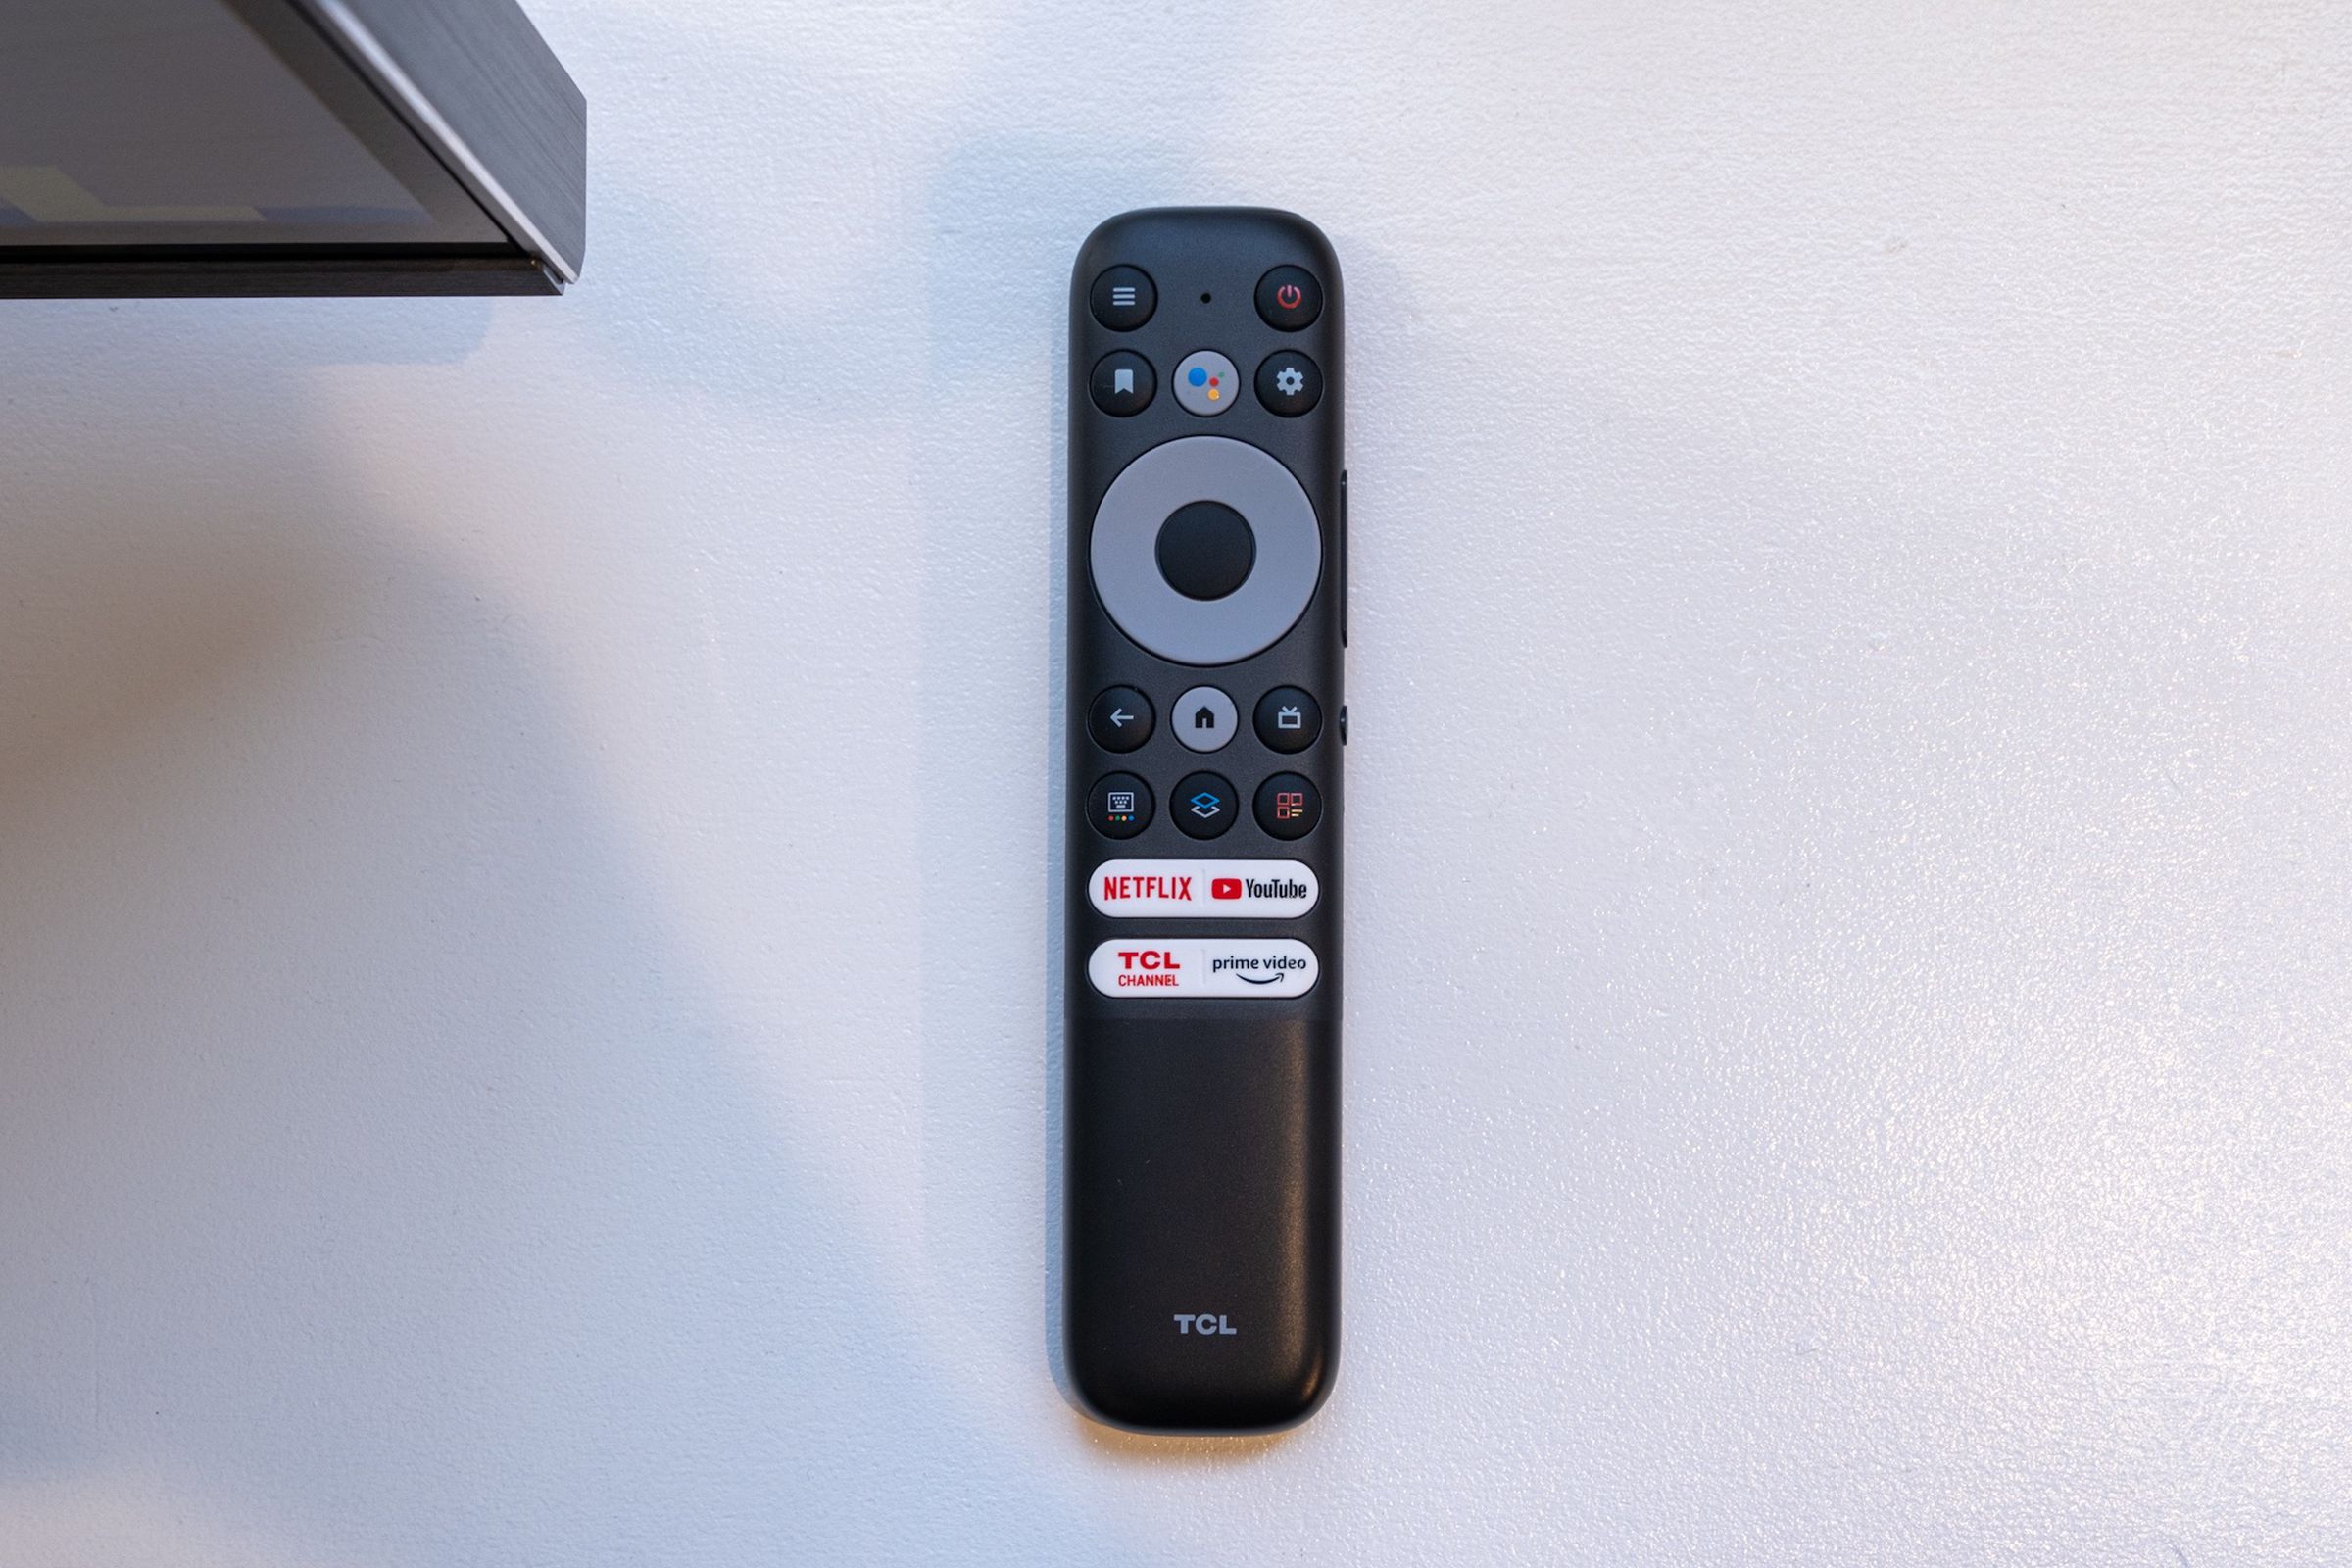 The remote for the TCL Google TVs is quite different from the Roku remote.